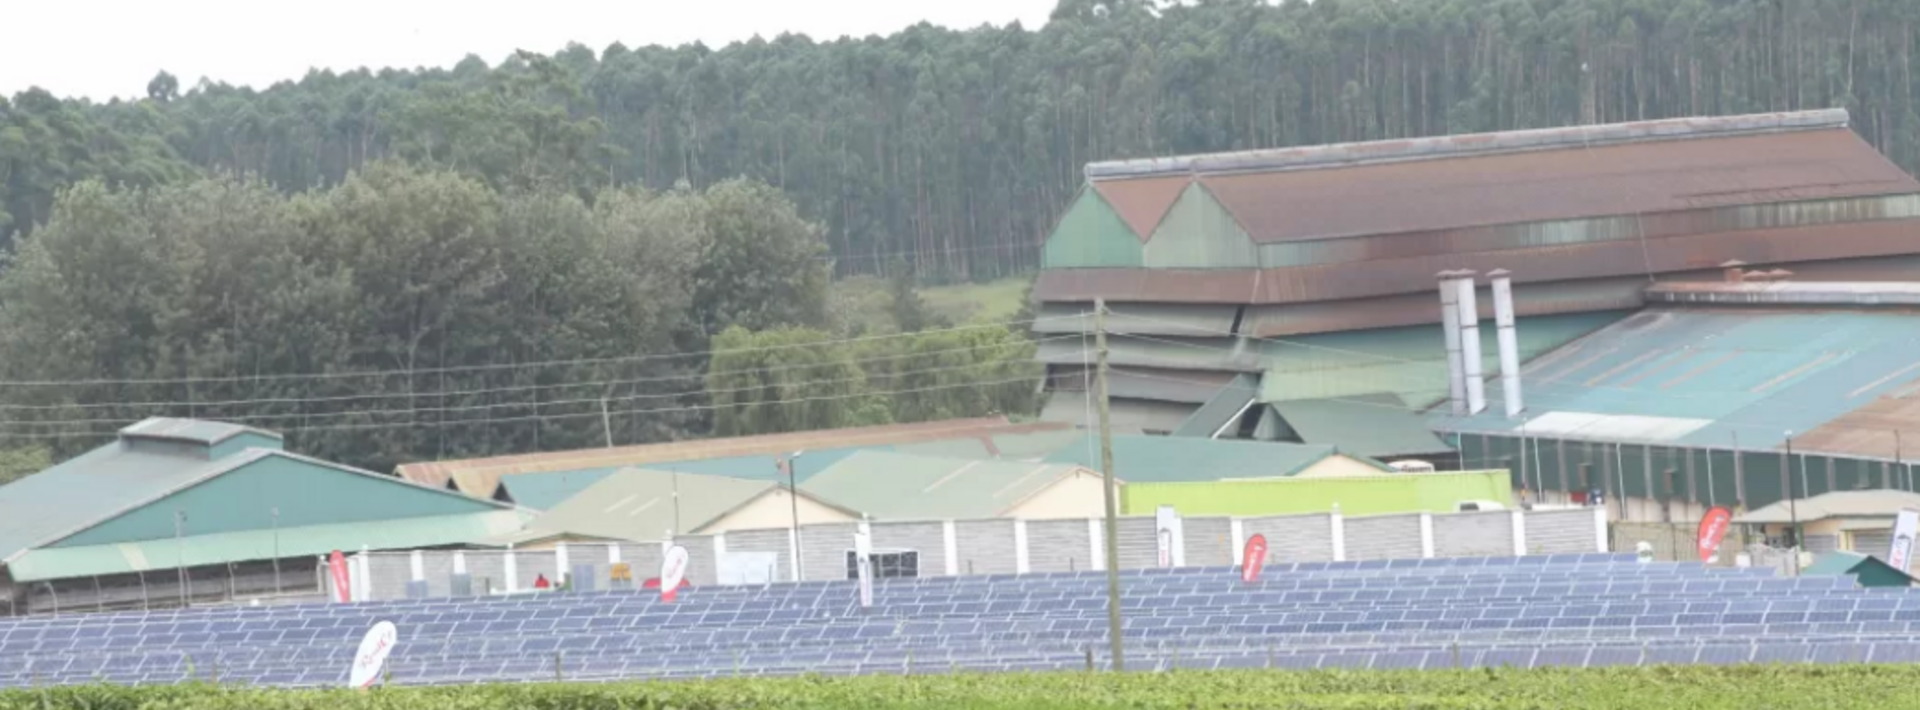 A field of tea leaves and solar panels with buildings and tall trees behind them